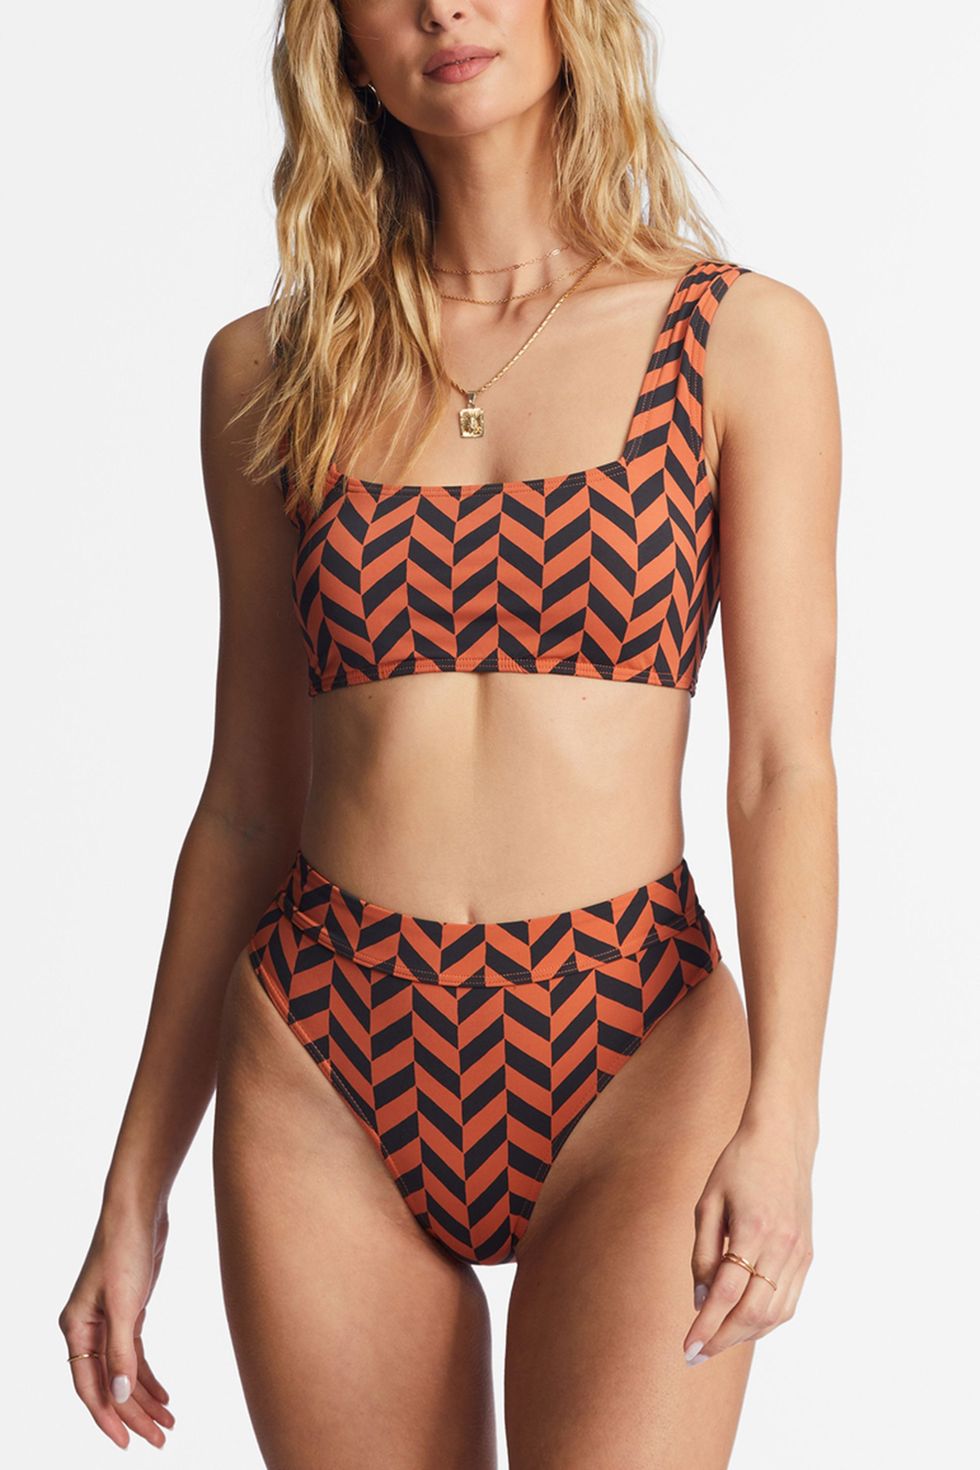 The Best High Waisted Bikinis To Buy in 2024